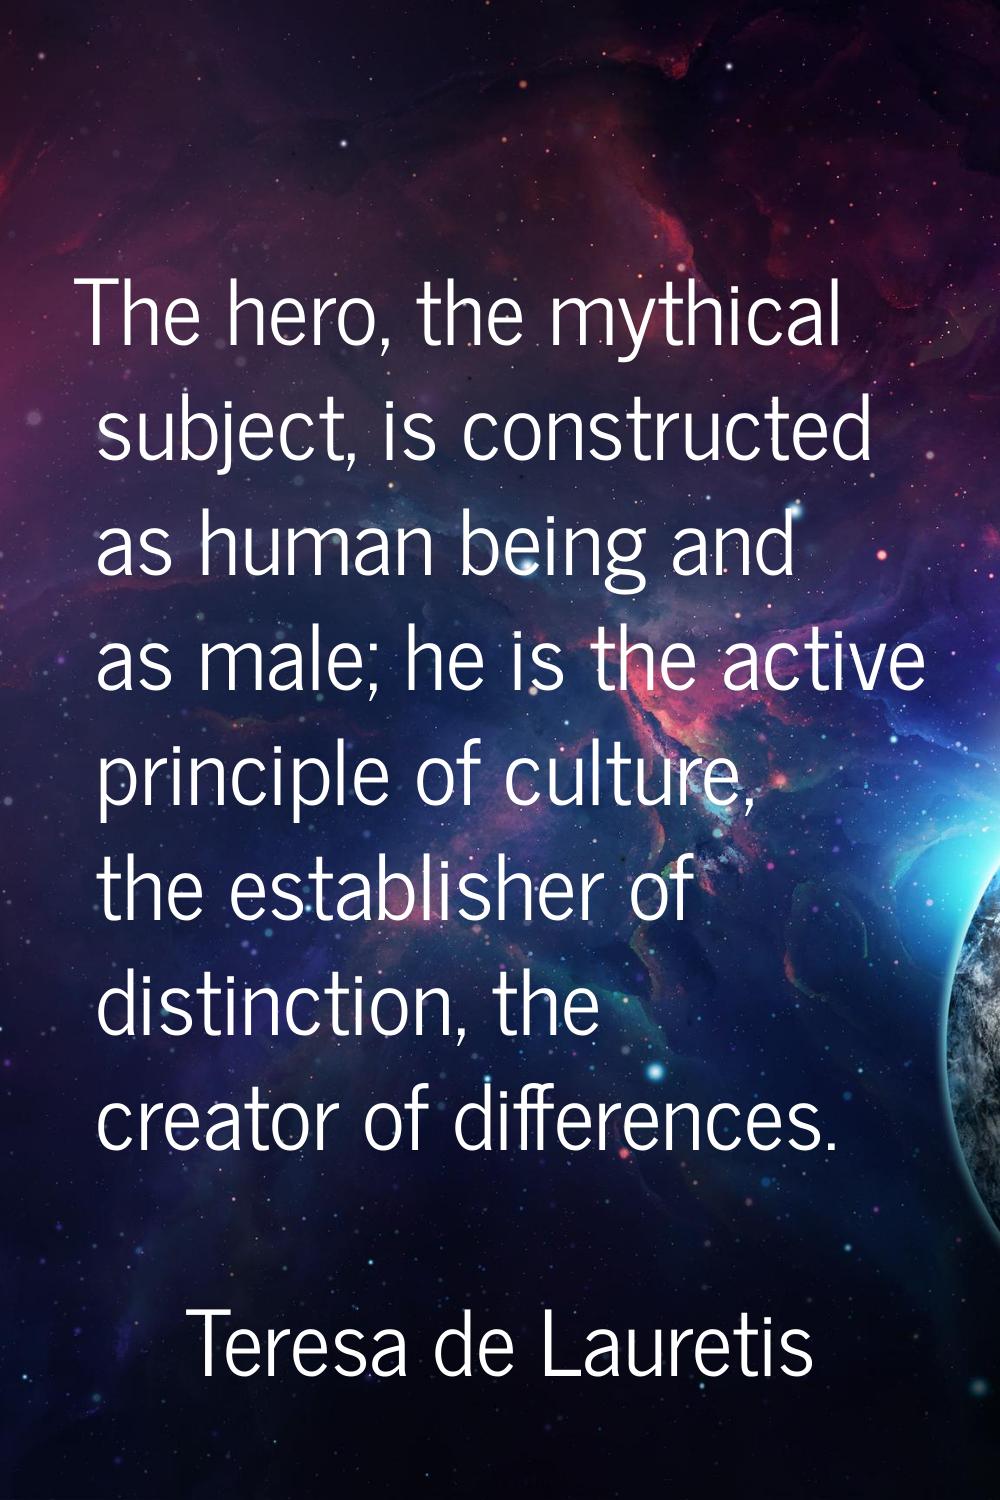 The hero, the mythical subject, is constructed as human being and as male; he is the active princip